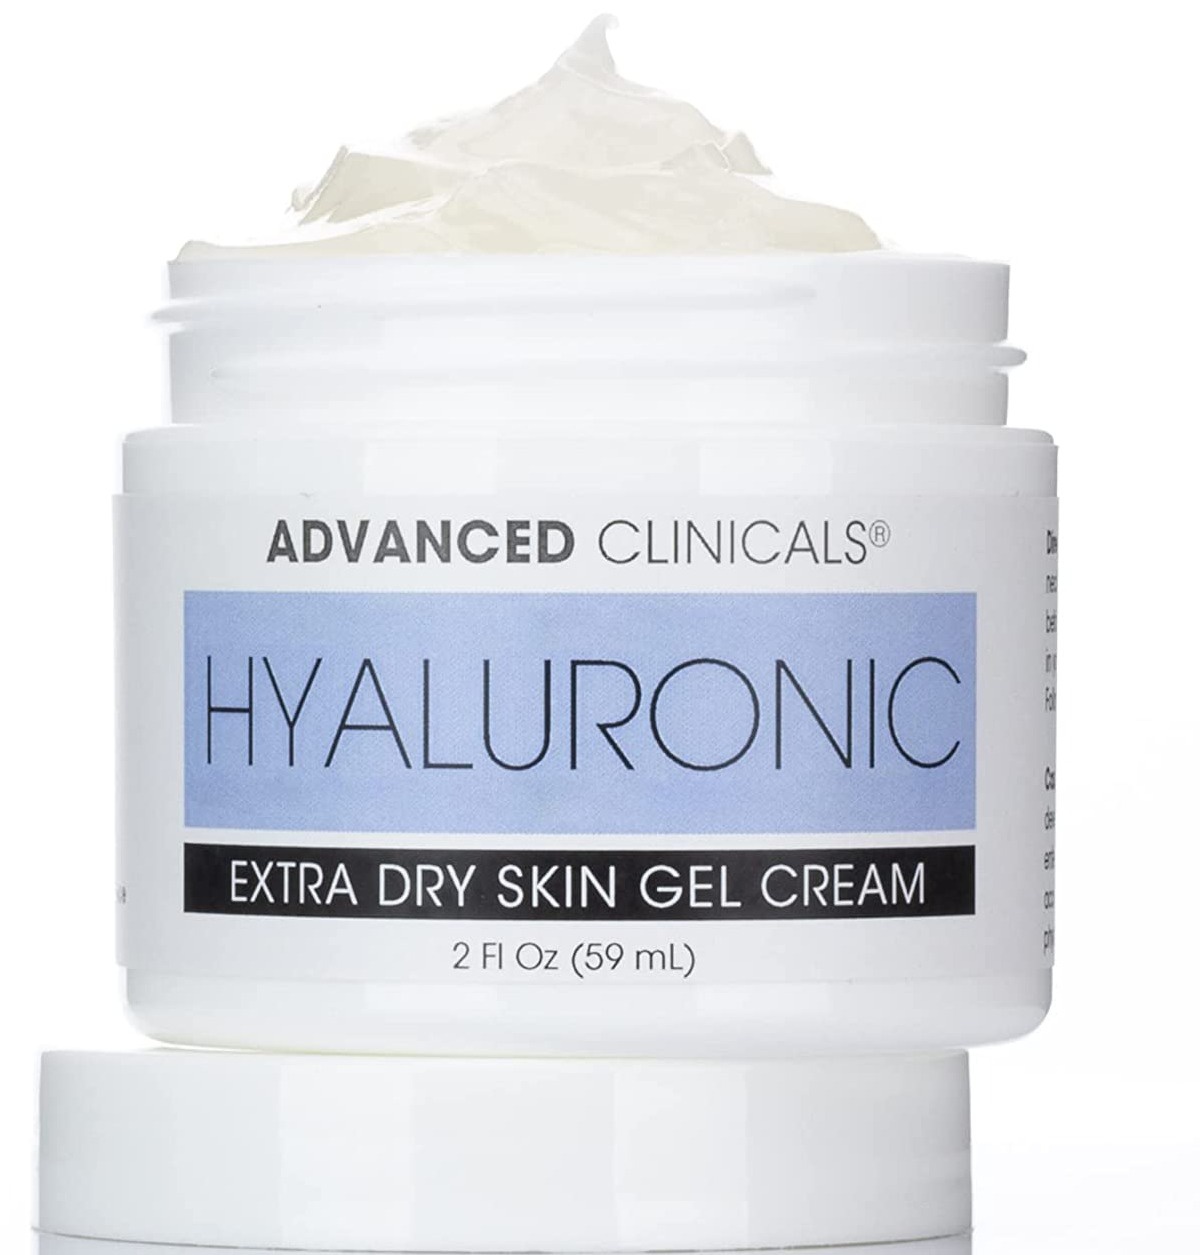 Advanced Clinicals Hyaluronic Acid Facial Cream